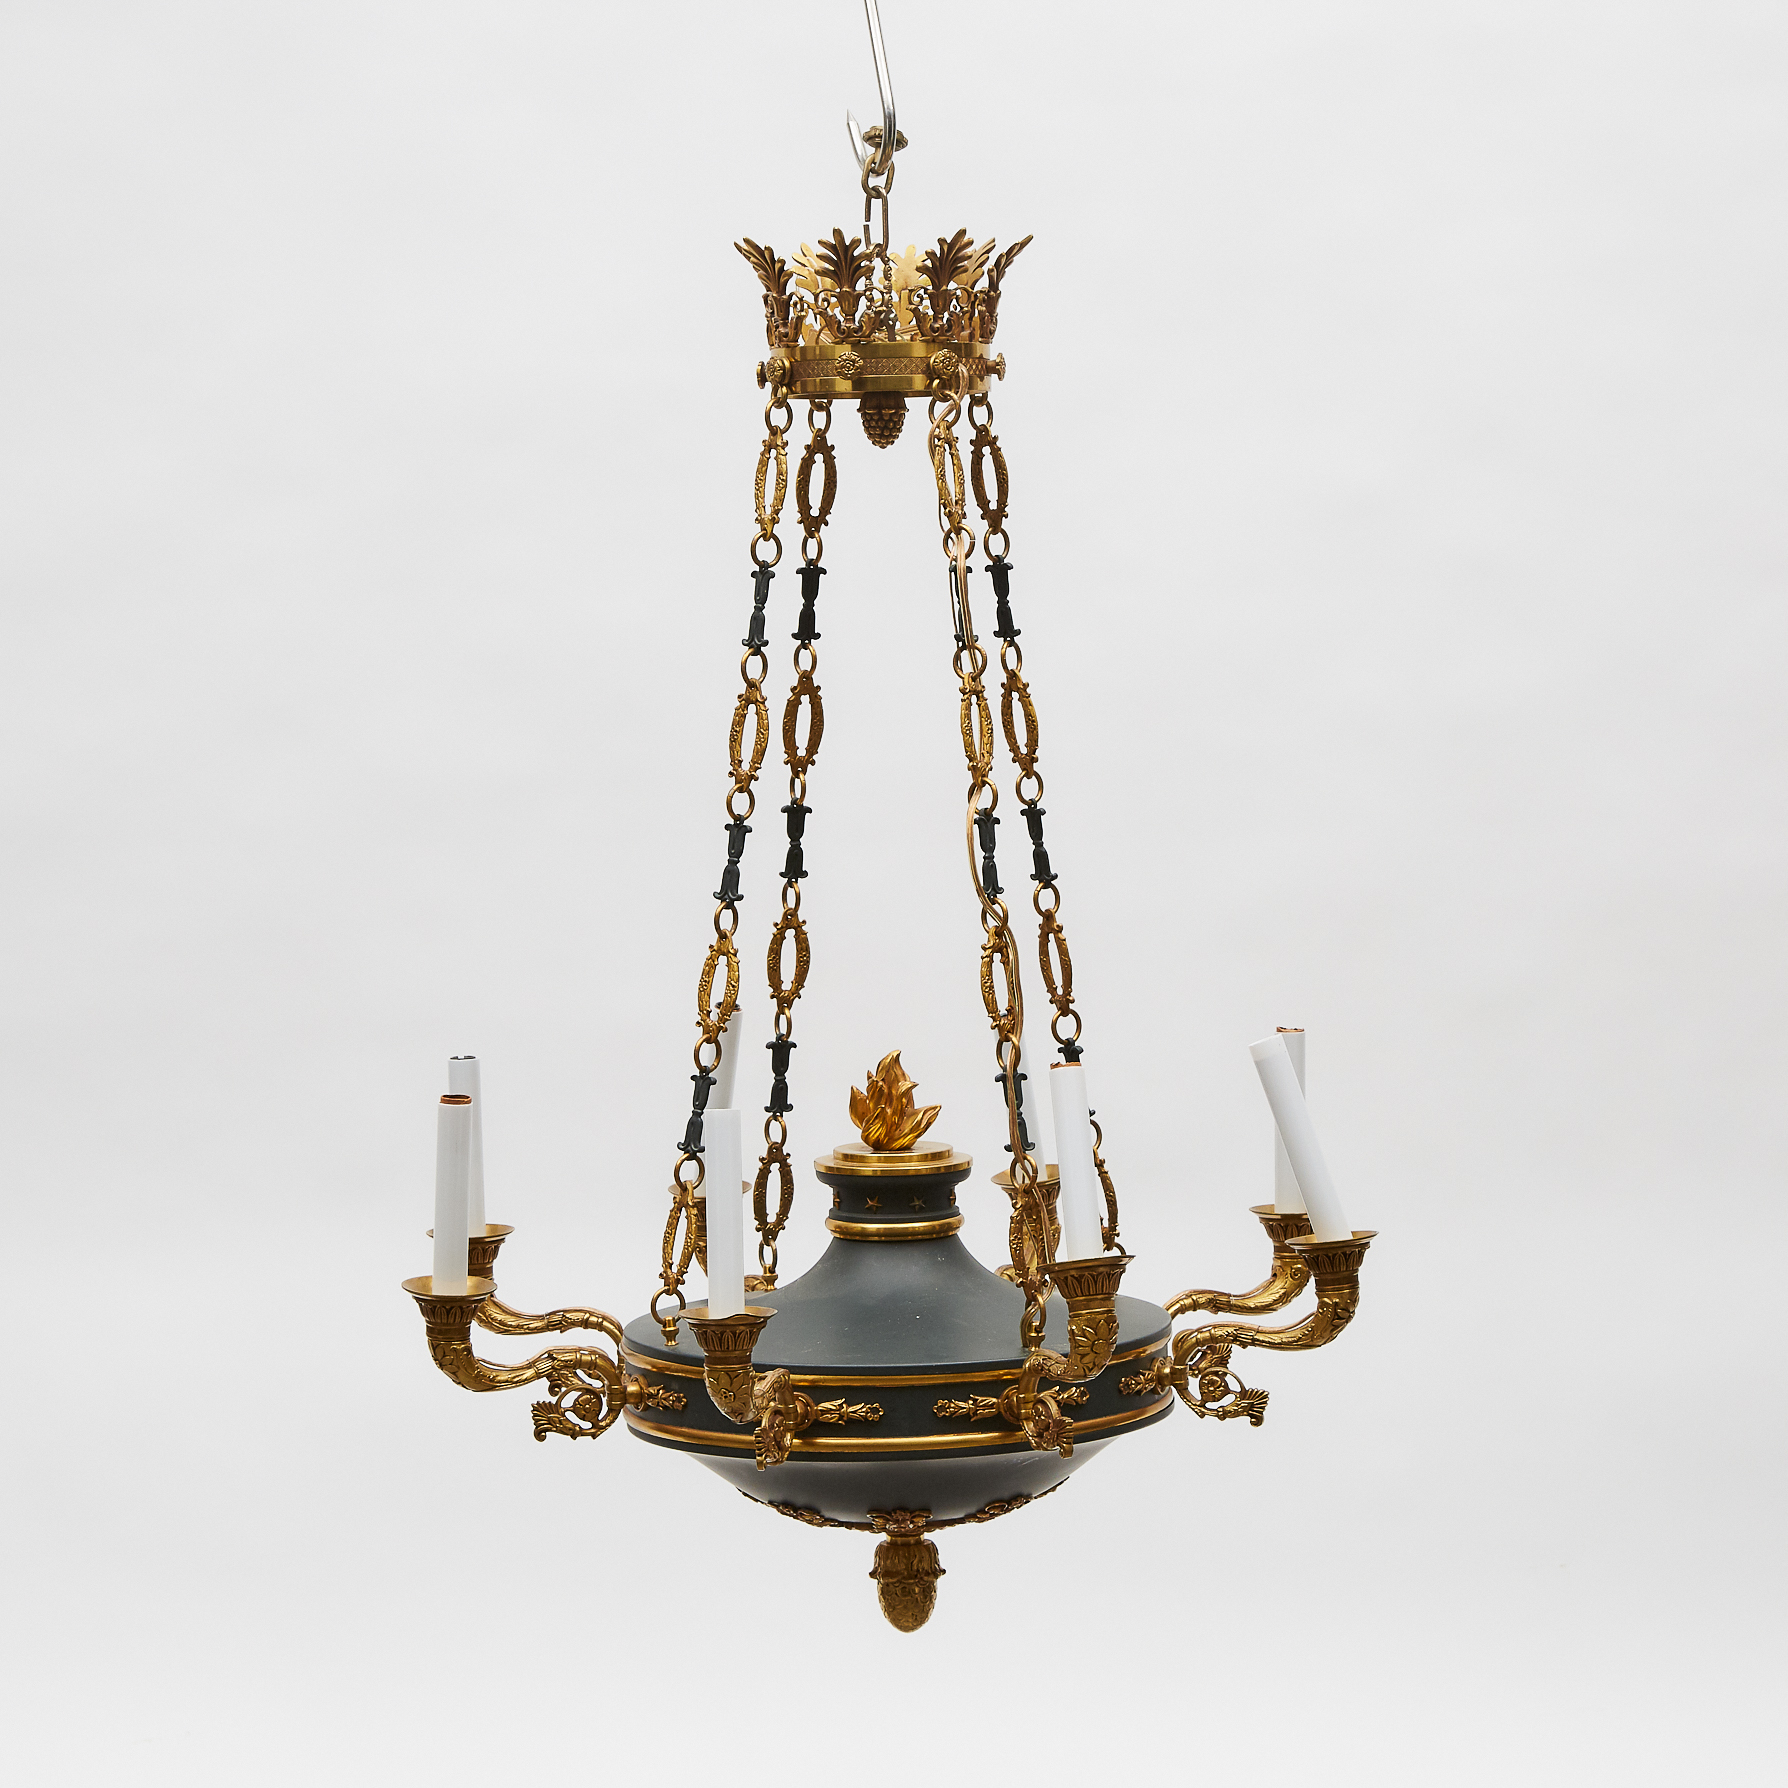 French Empire Style Gilt and Lacquered Metal Chandelier, 20th century